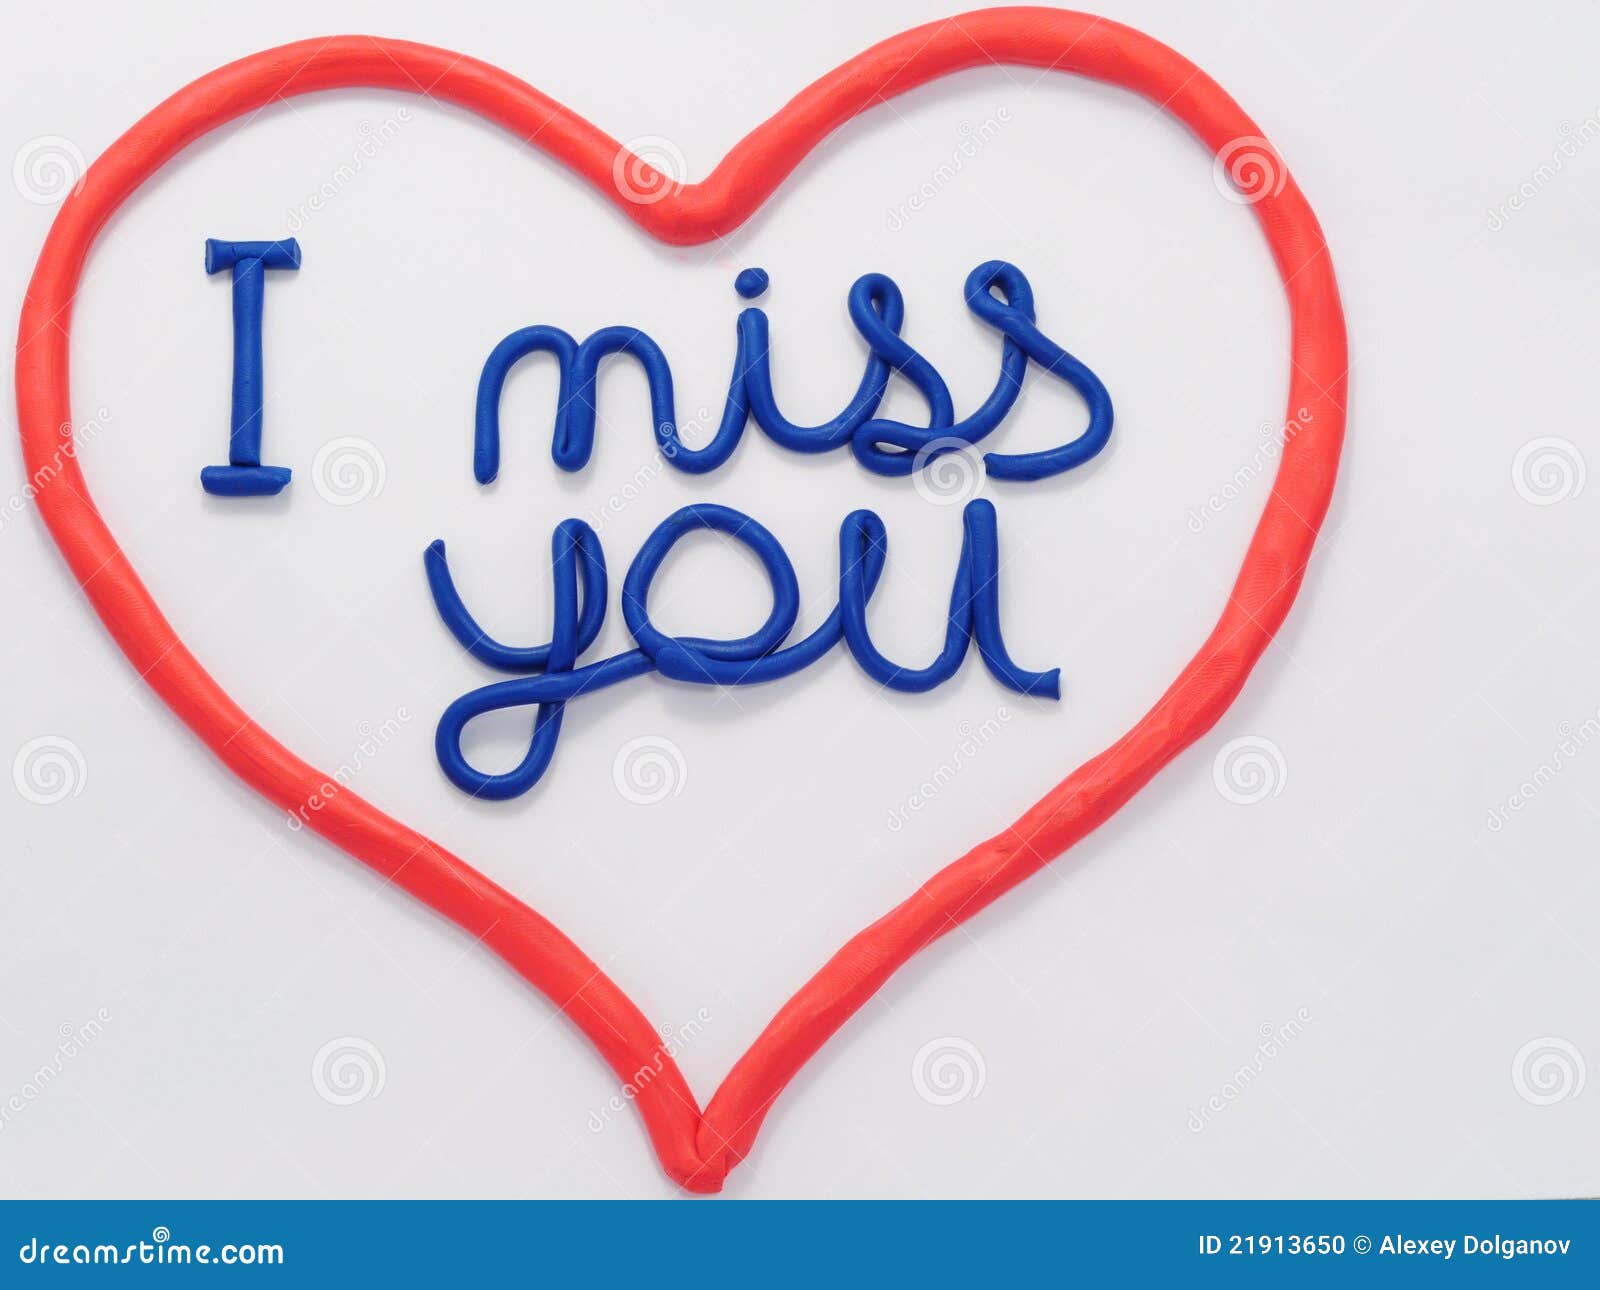 miss you clipart animation - photo #25